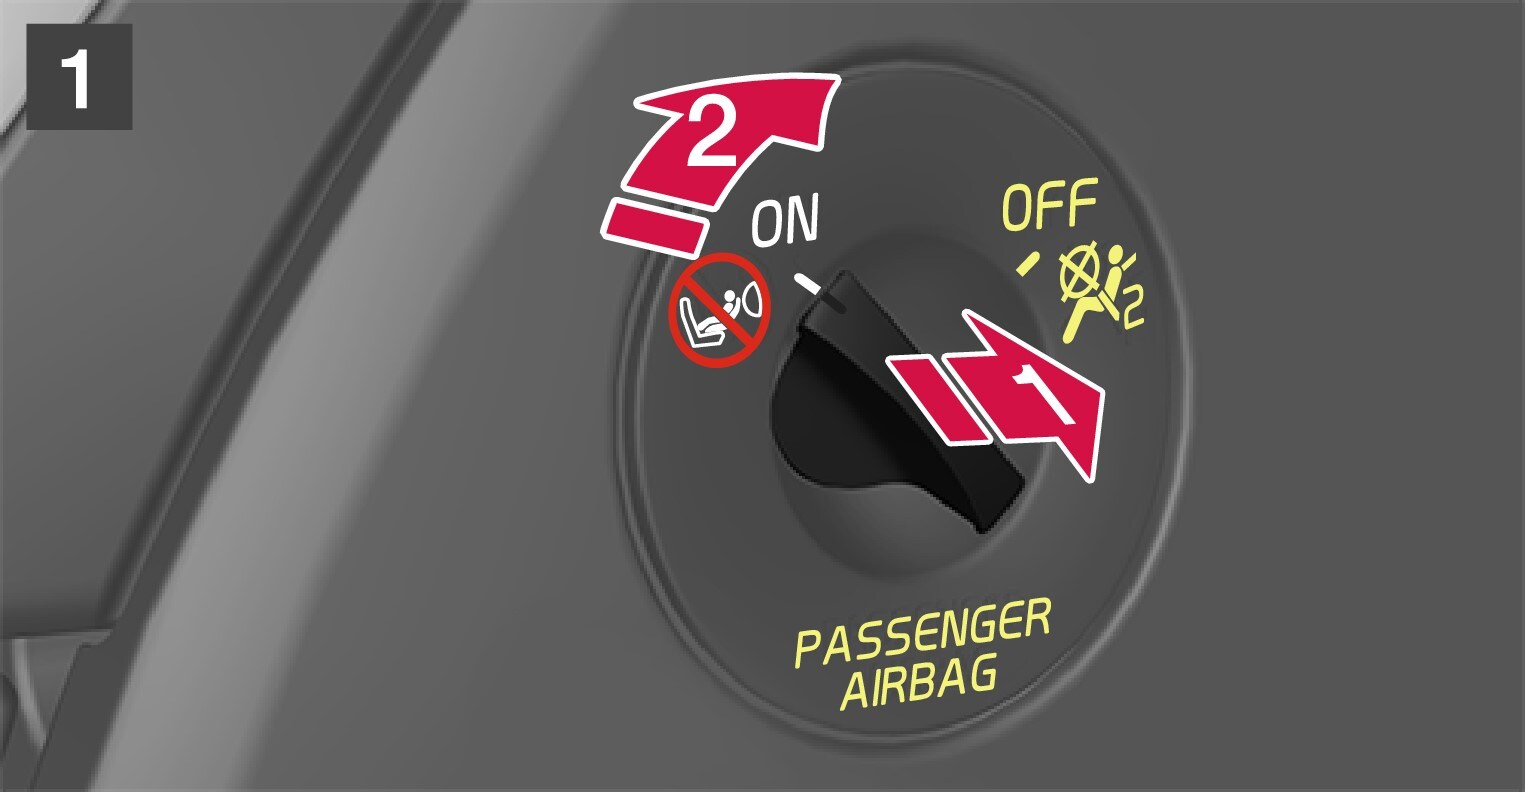 P5-1507–Safety–Passenger airbag cut off switch to off